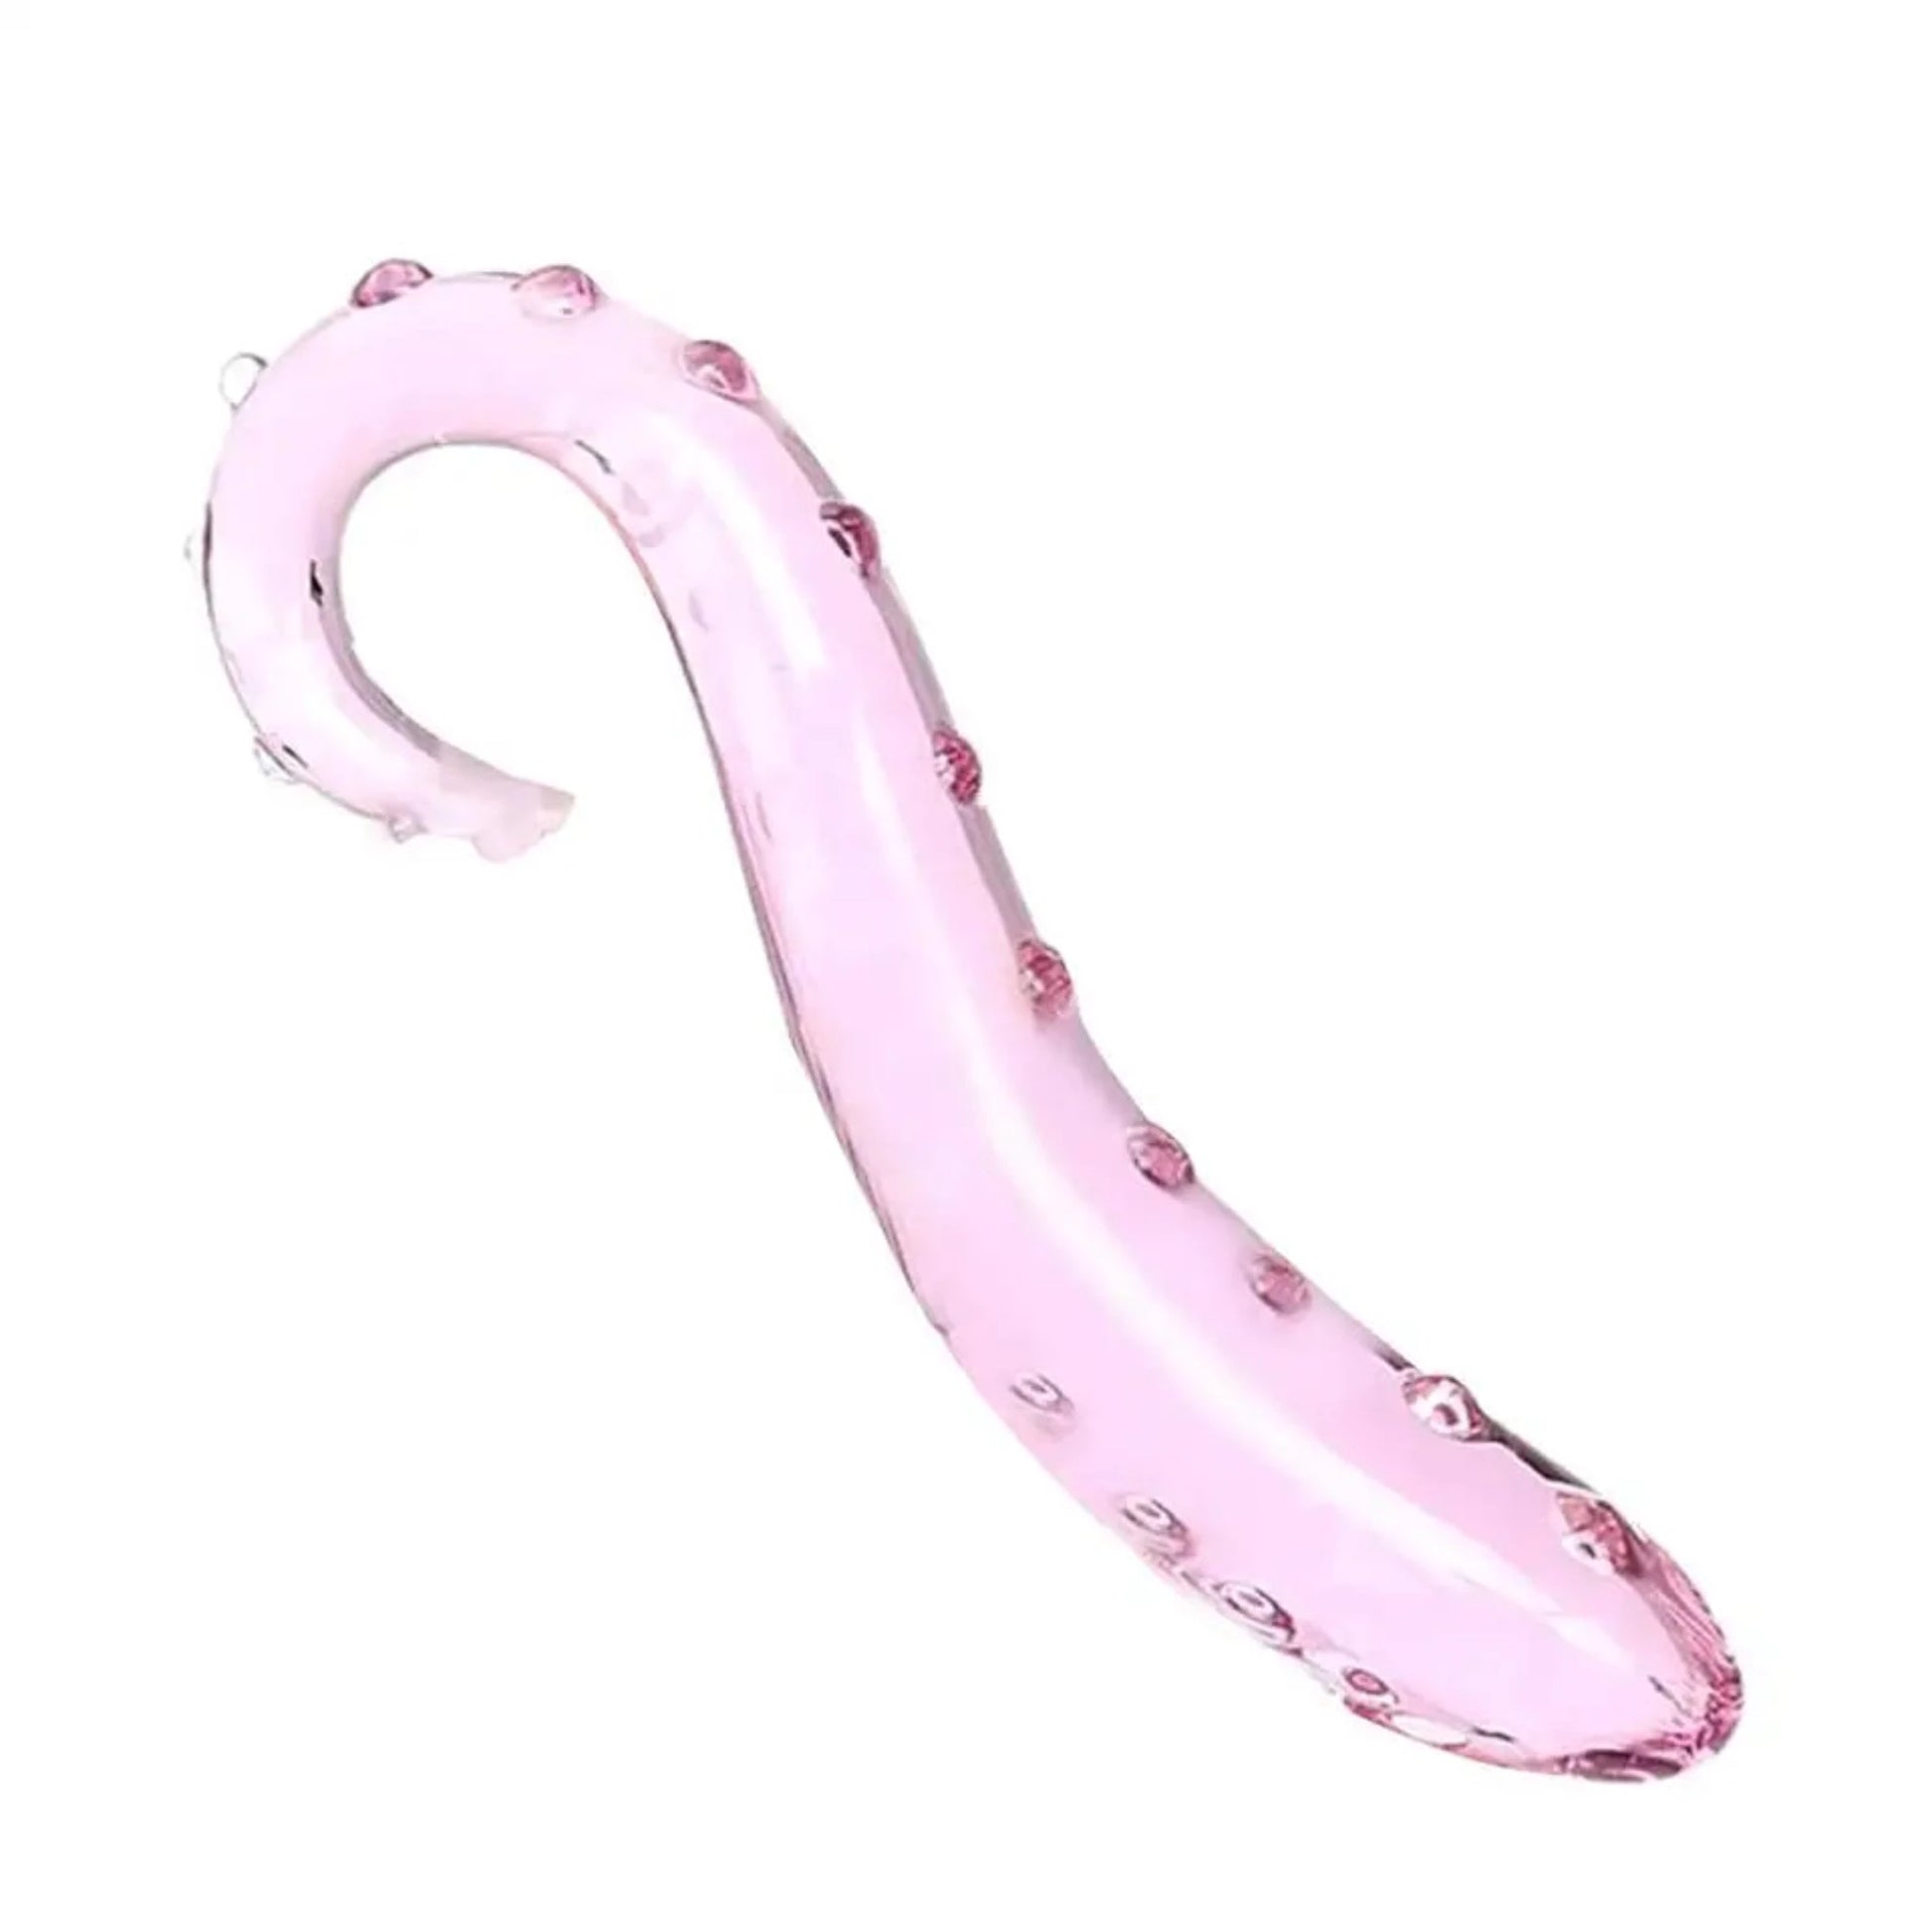 Youngwill Hippocampus Shape Pink Glass Anal Plug